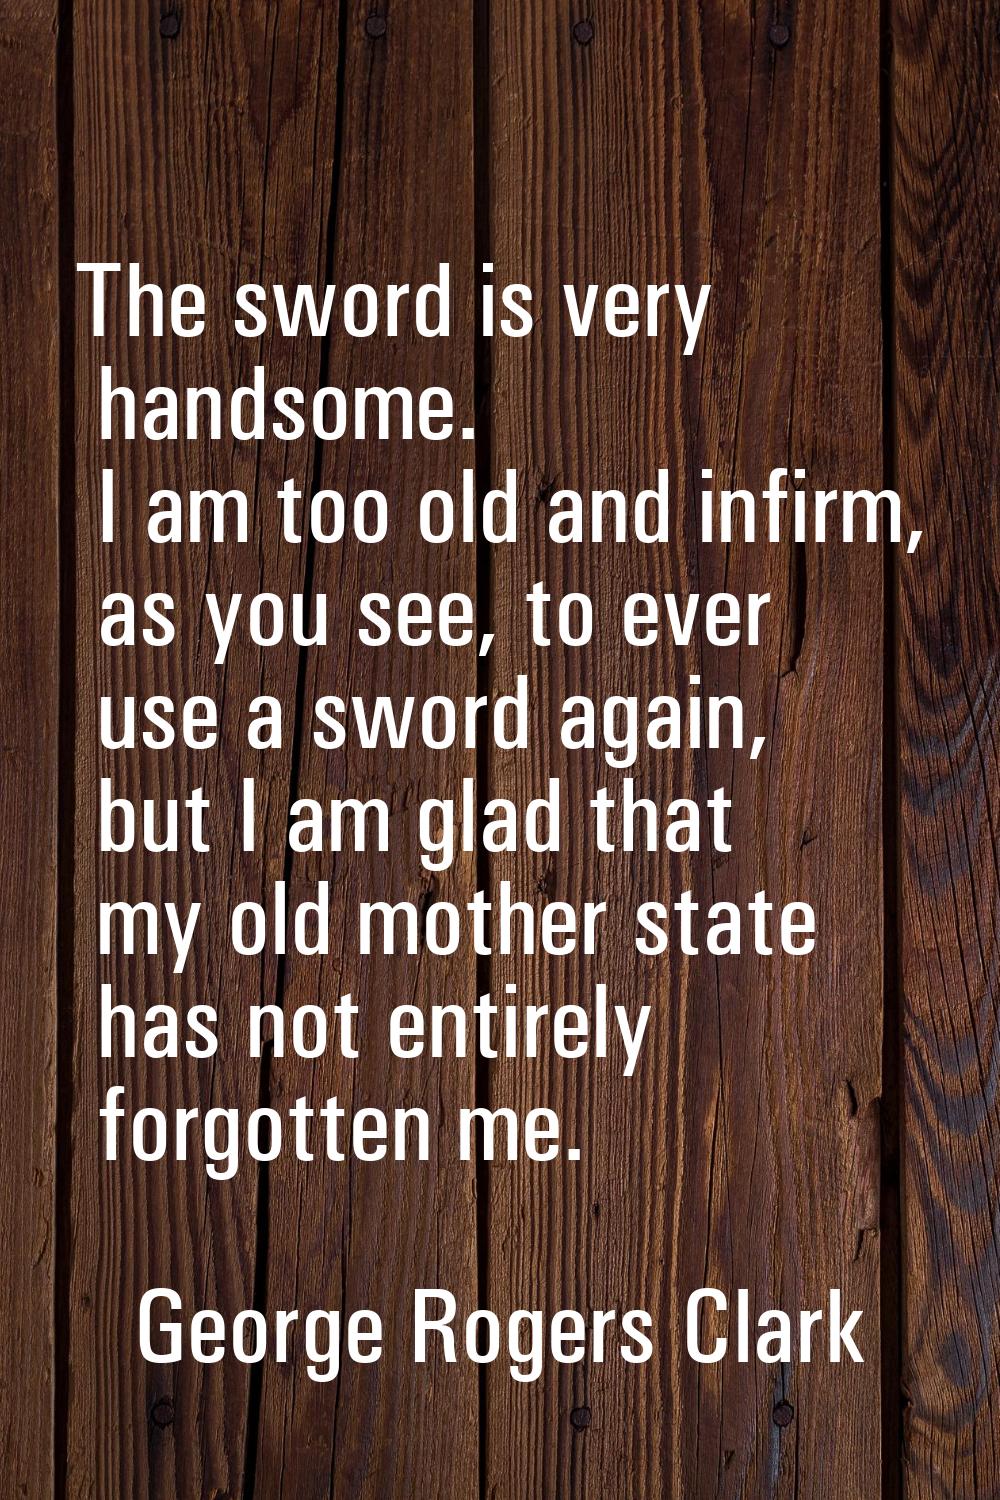 The sword is very handsome. I am too old and infirm, as you see, to ever use a sword again, but I a